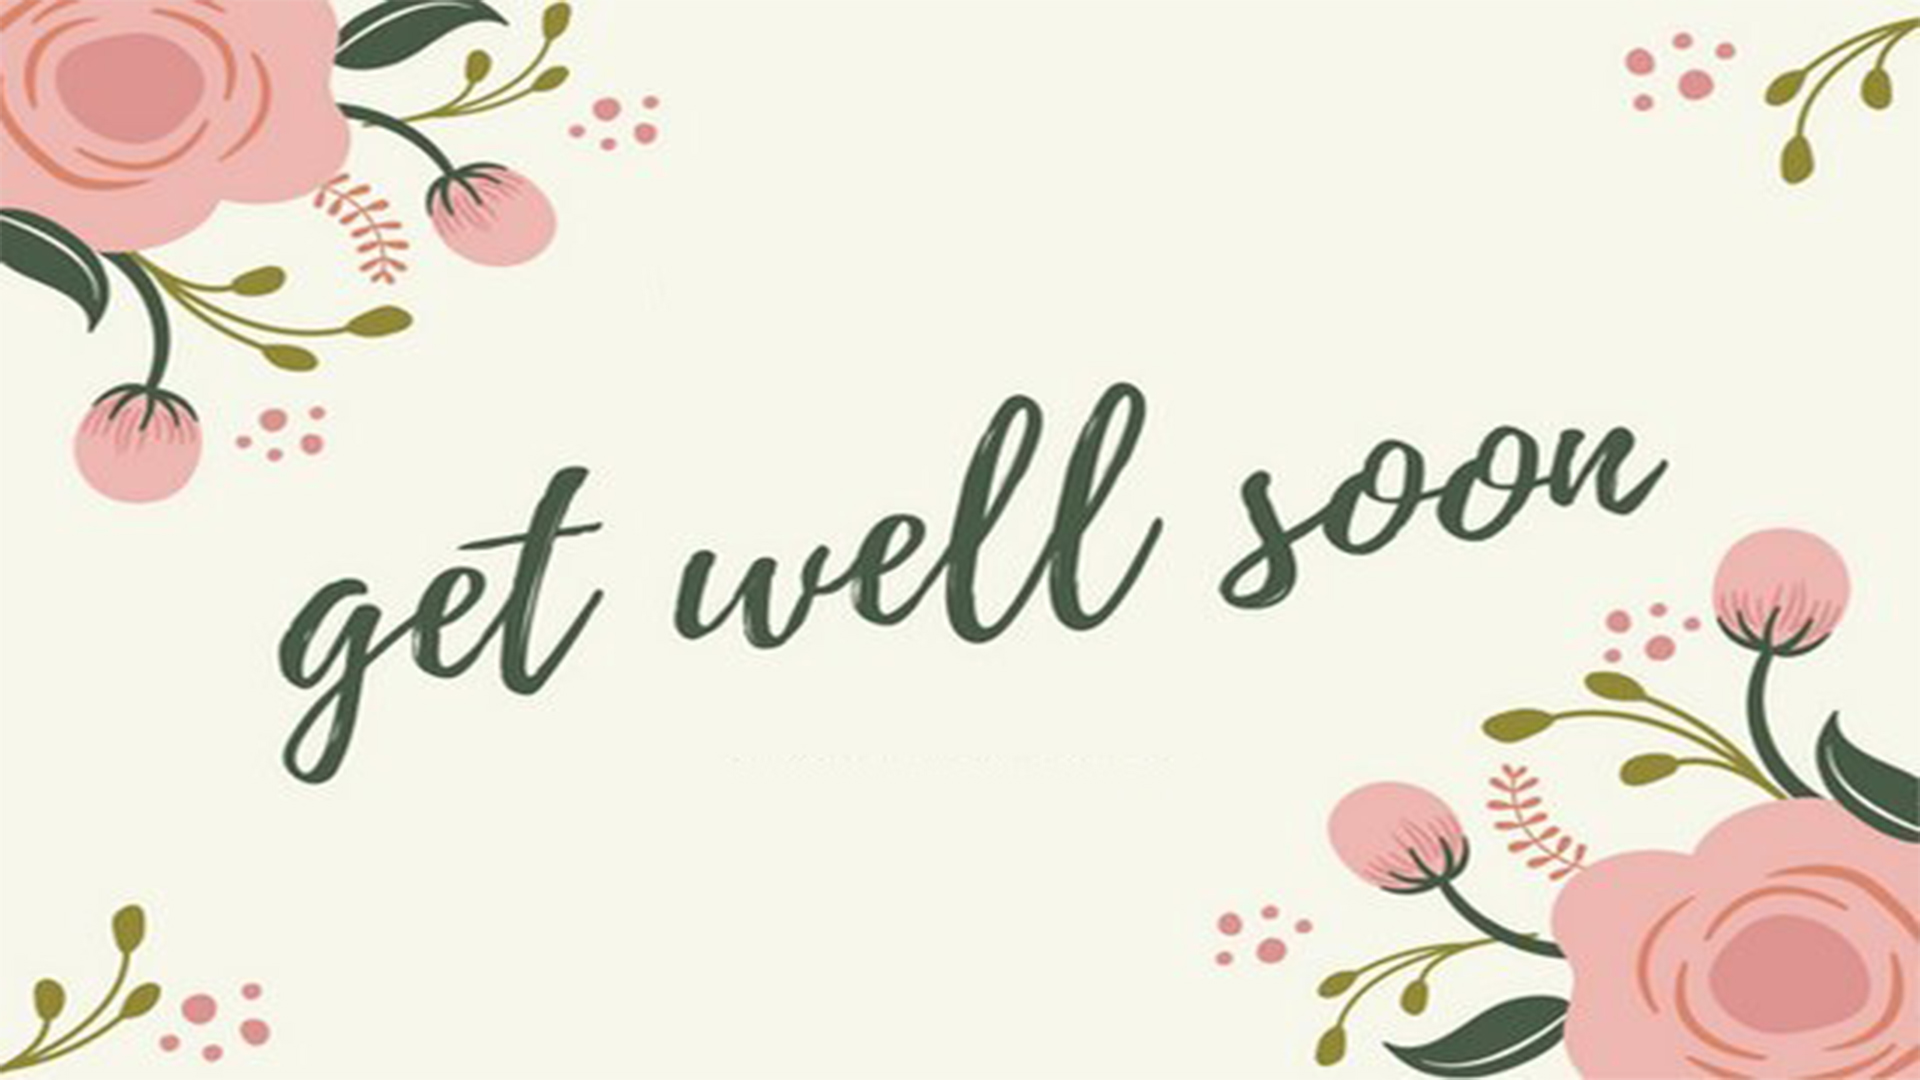 get well cards image..